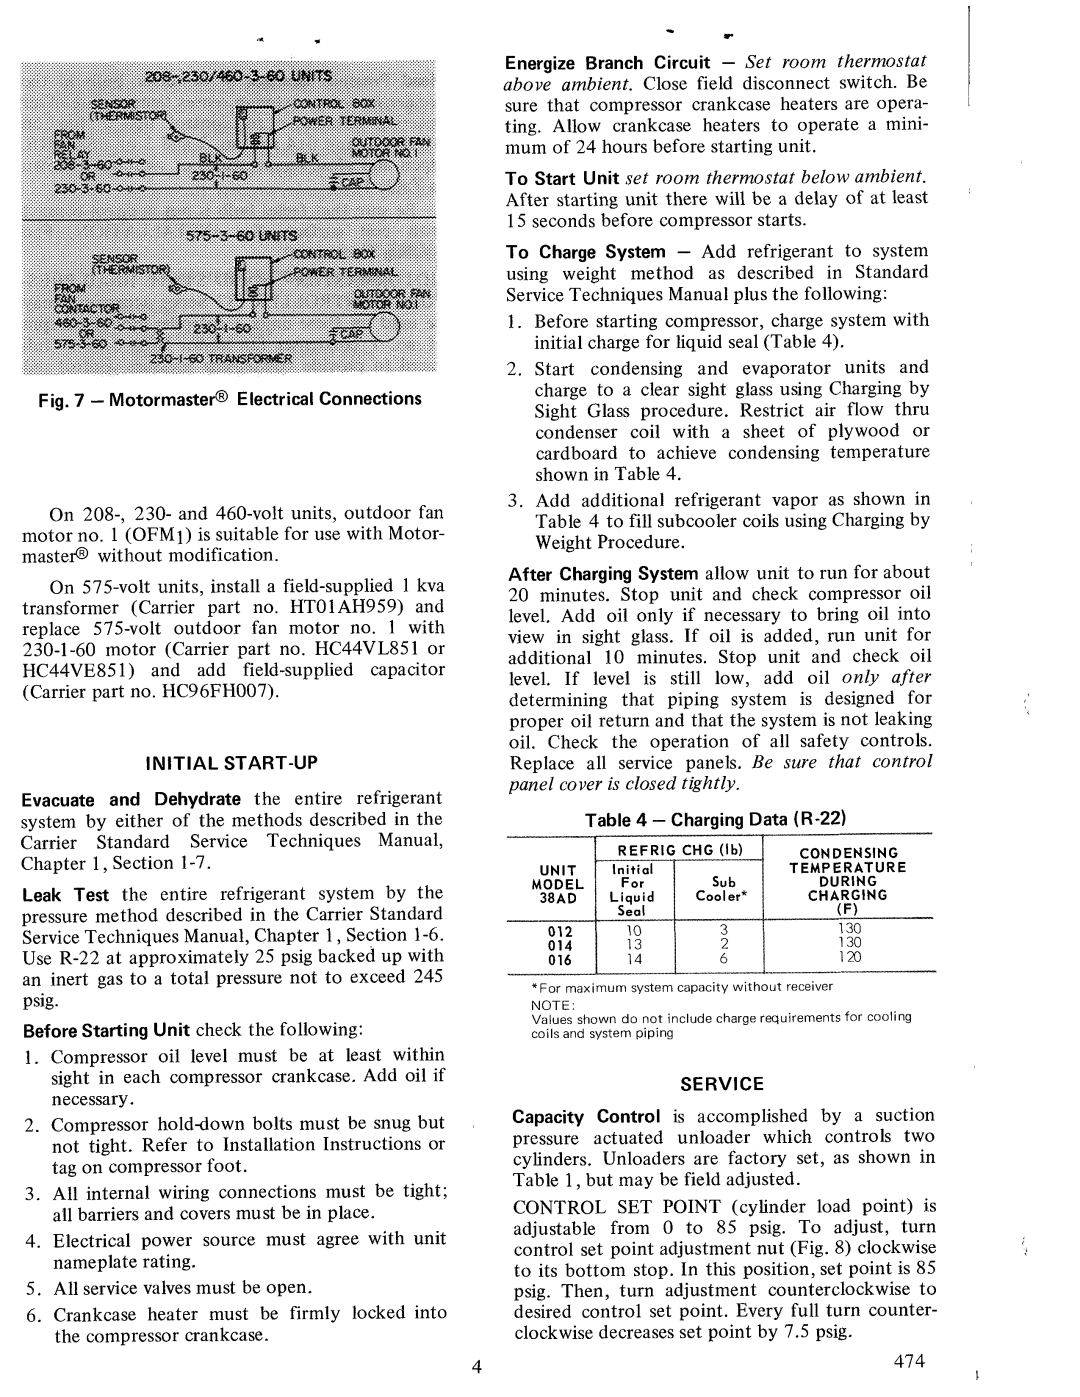 Carrier 38AD manual 